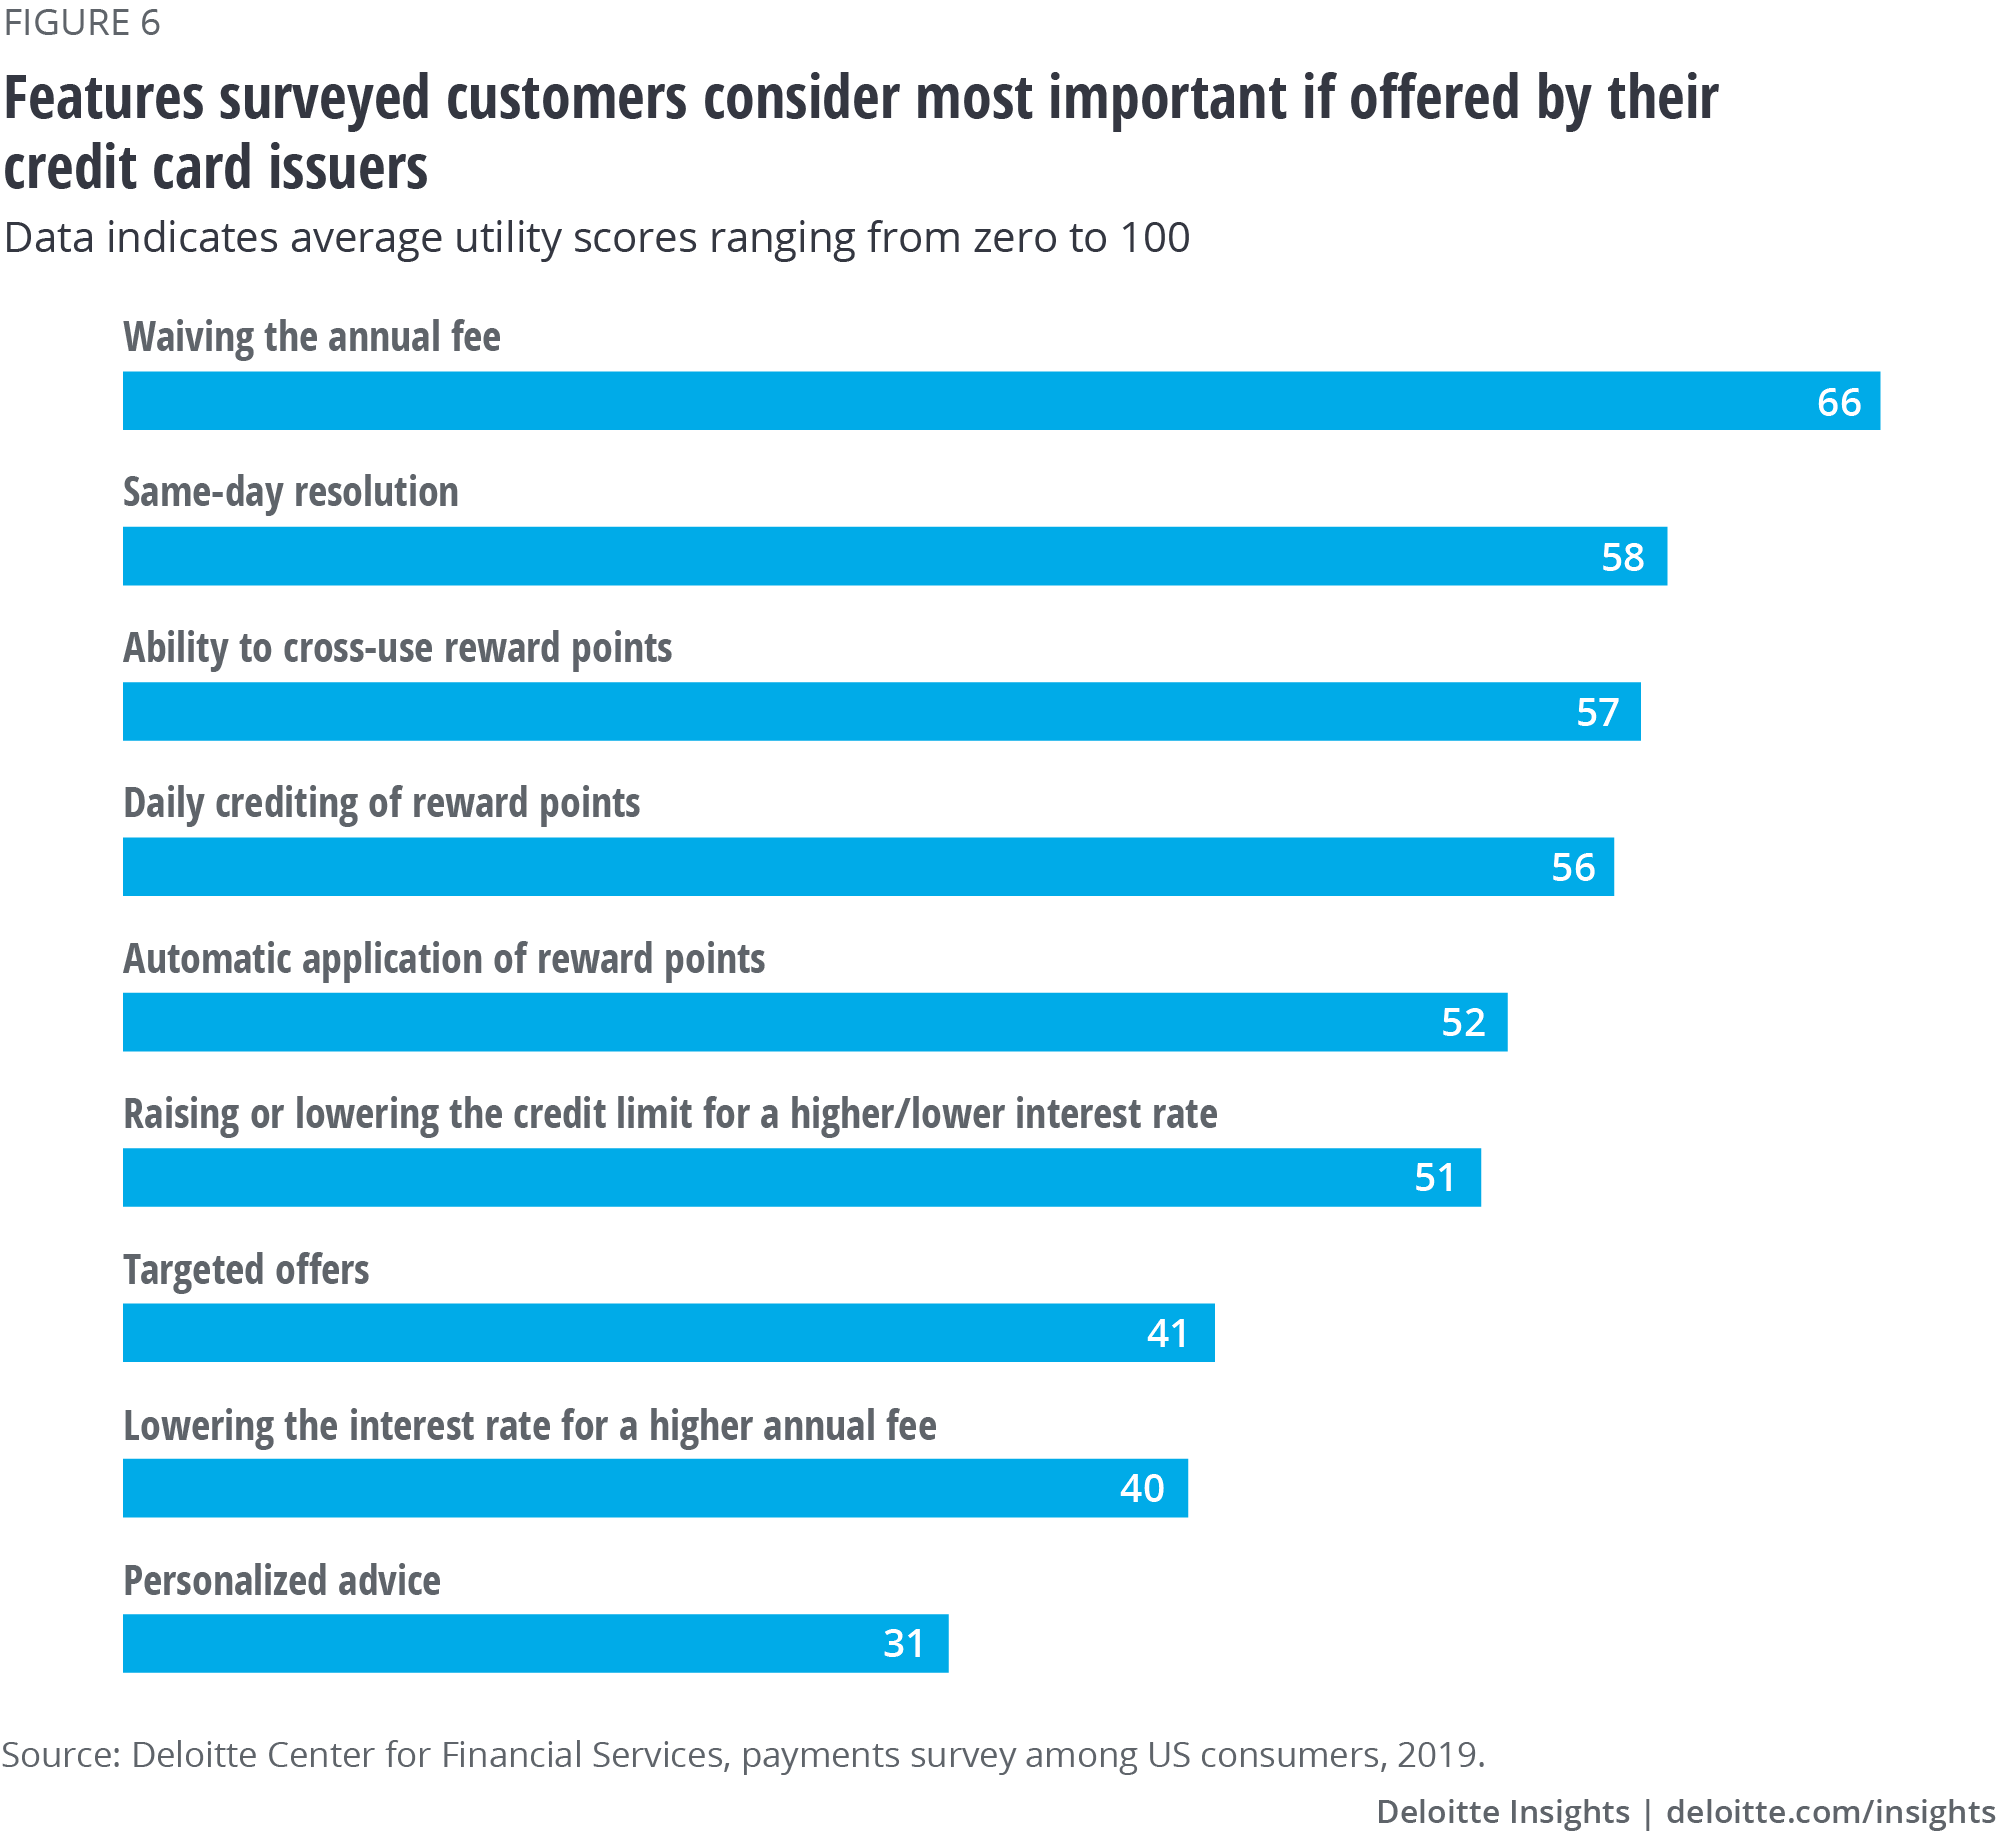 Features surveyed customers consider most important if offered by their credit card issuers